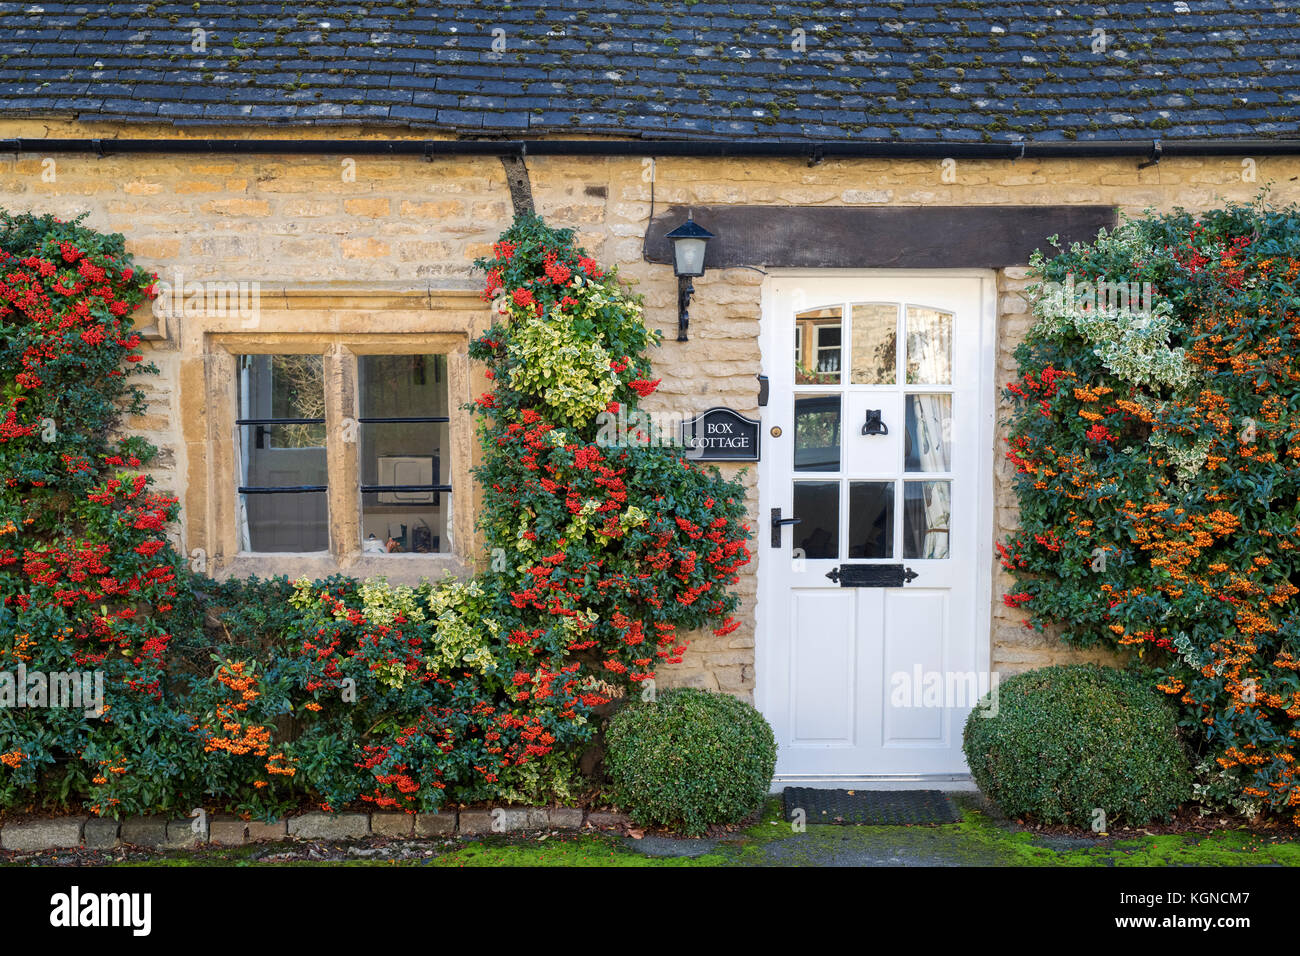 Pyracantha. Firethorn bushes and berries on the exterior of Box Cottage, Broadwell, Cotswolds, Gloucestershire, England Stock Photo